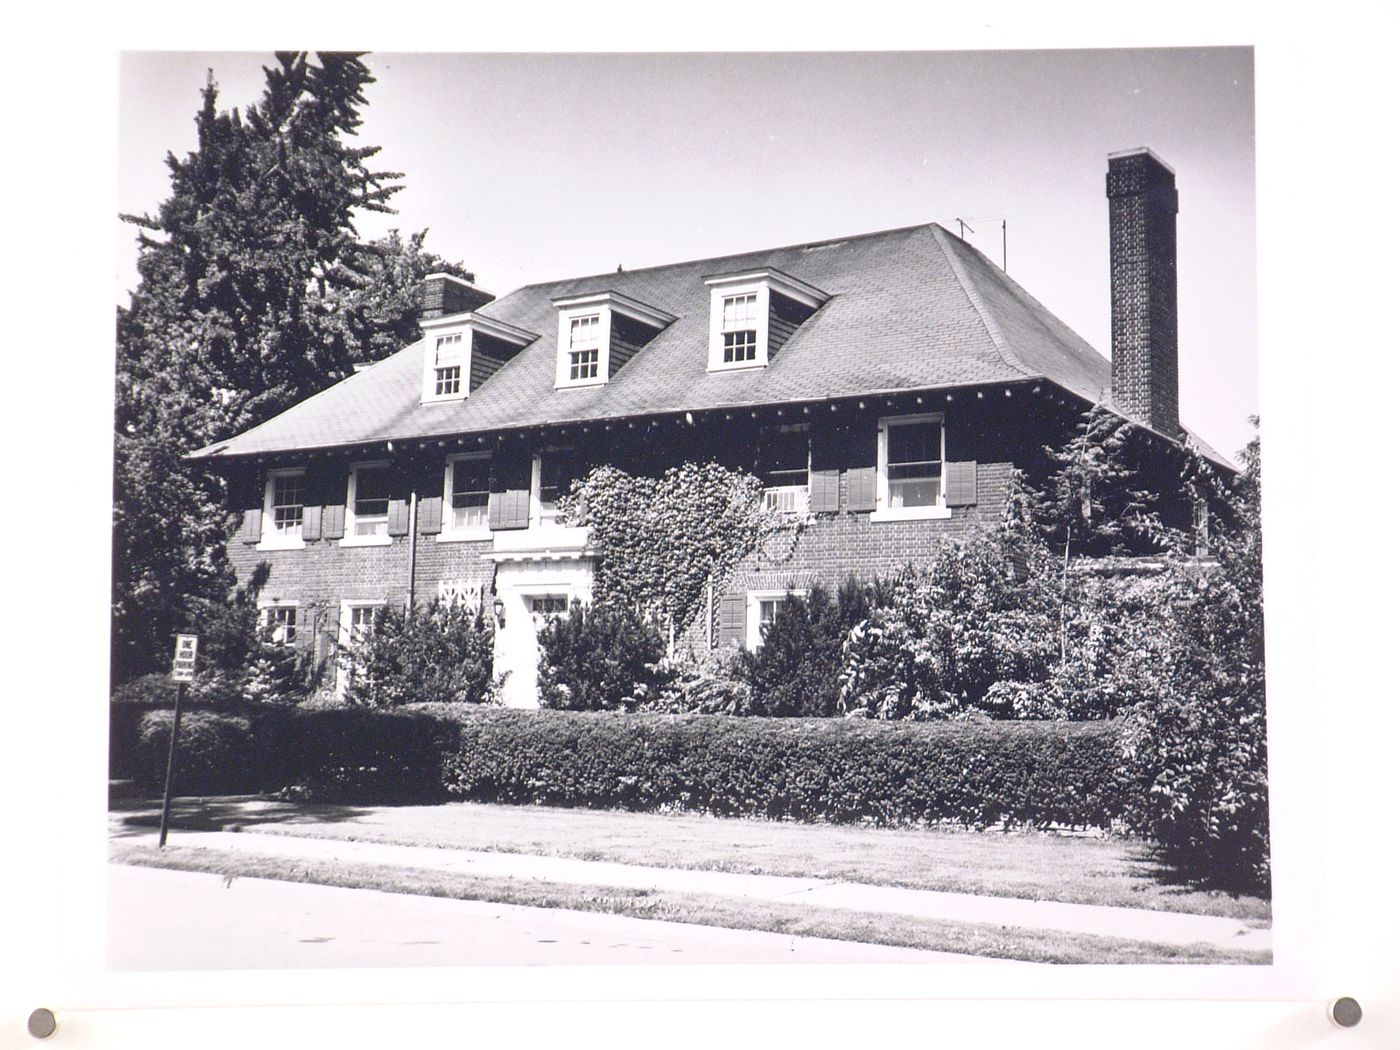 View of the principal façade of the Frank and Robert Kuhn house, McKinley Road, Grosse Pointe Farms, Michigan